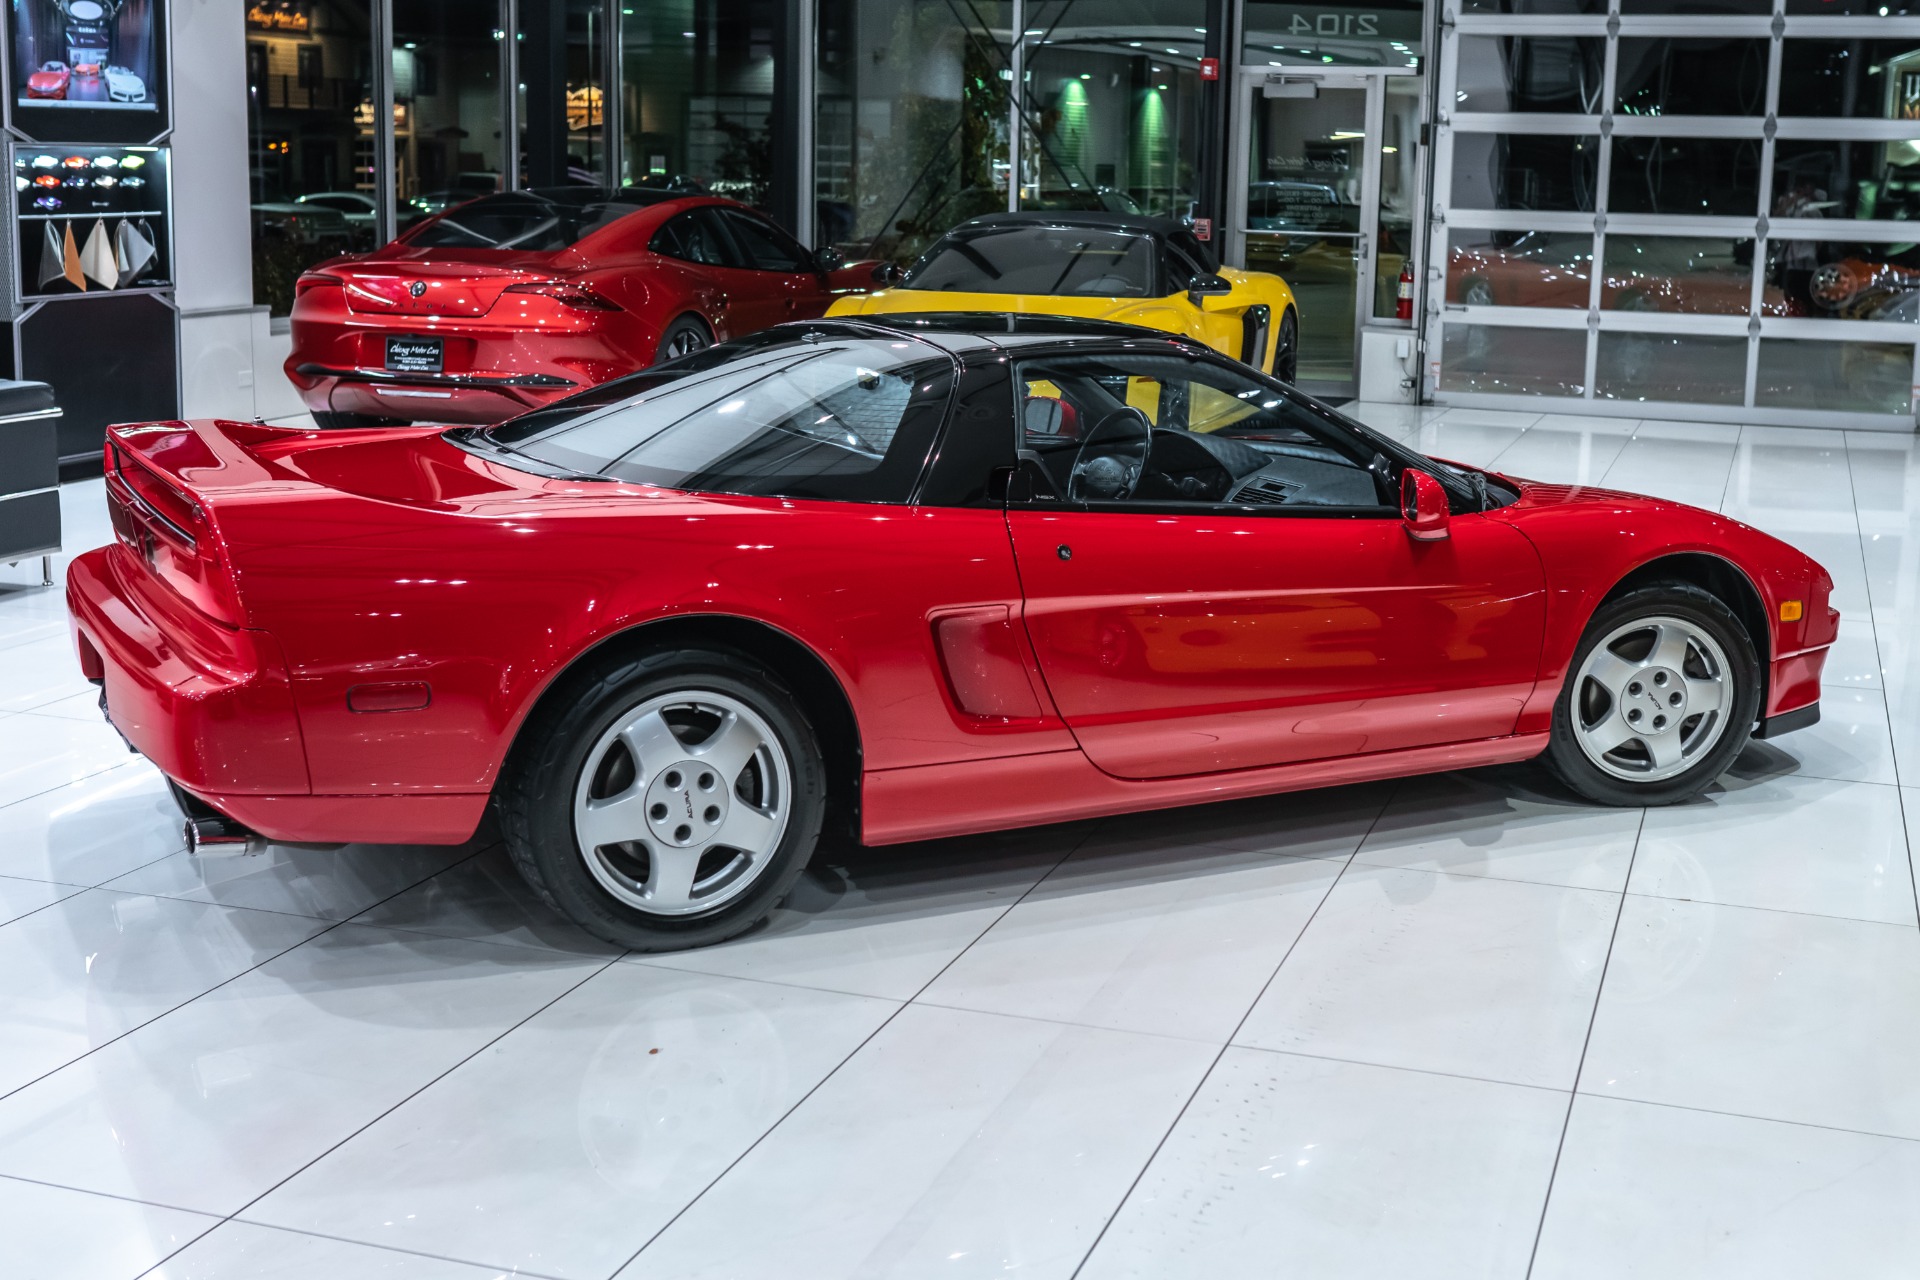 Used-1991-Acura-NSX-Only-25k-Miles-5-Speed-Manual-Collector-Quality-Very-Well-Documented